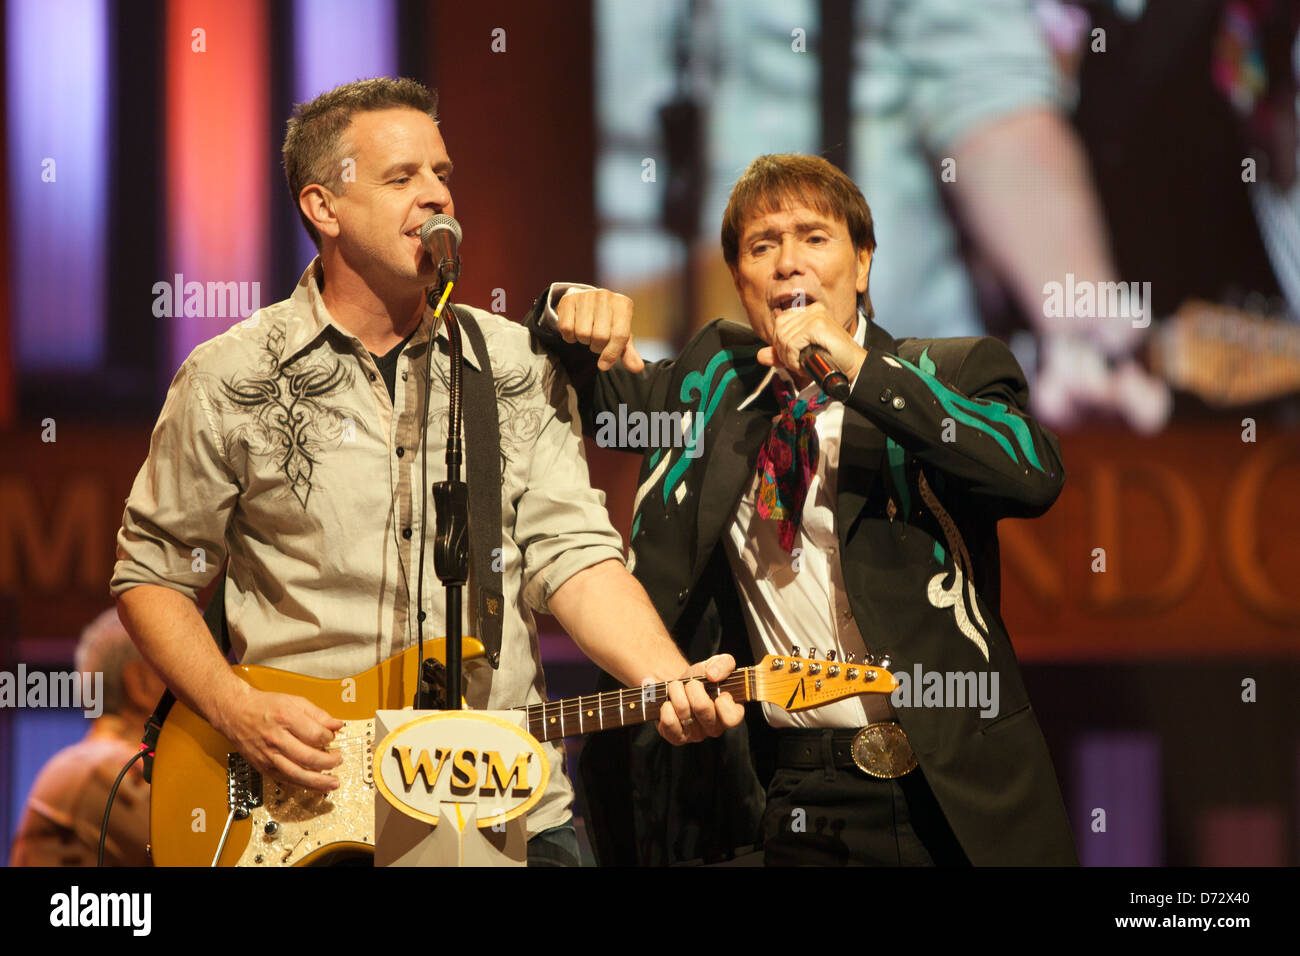 Cliff Richard performs with guitarist Steve Mandile at the Grand Ole Opry, Nashville Tennessee, USA Stock Photo